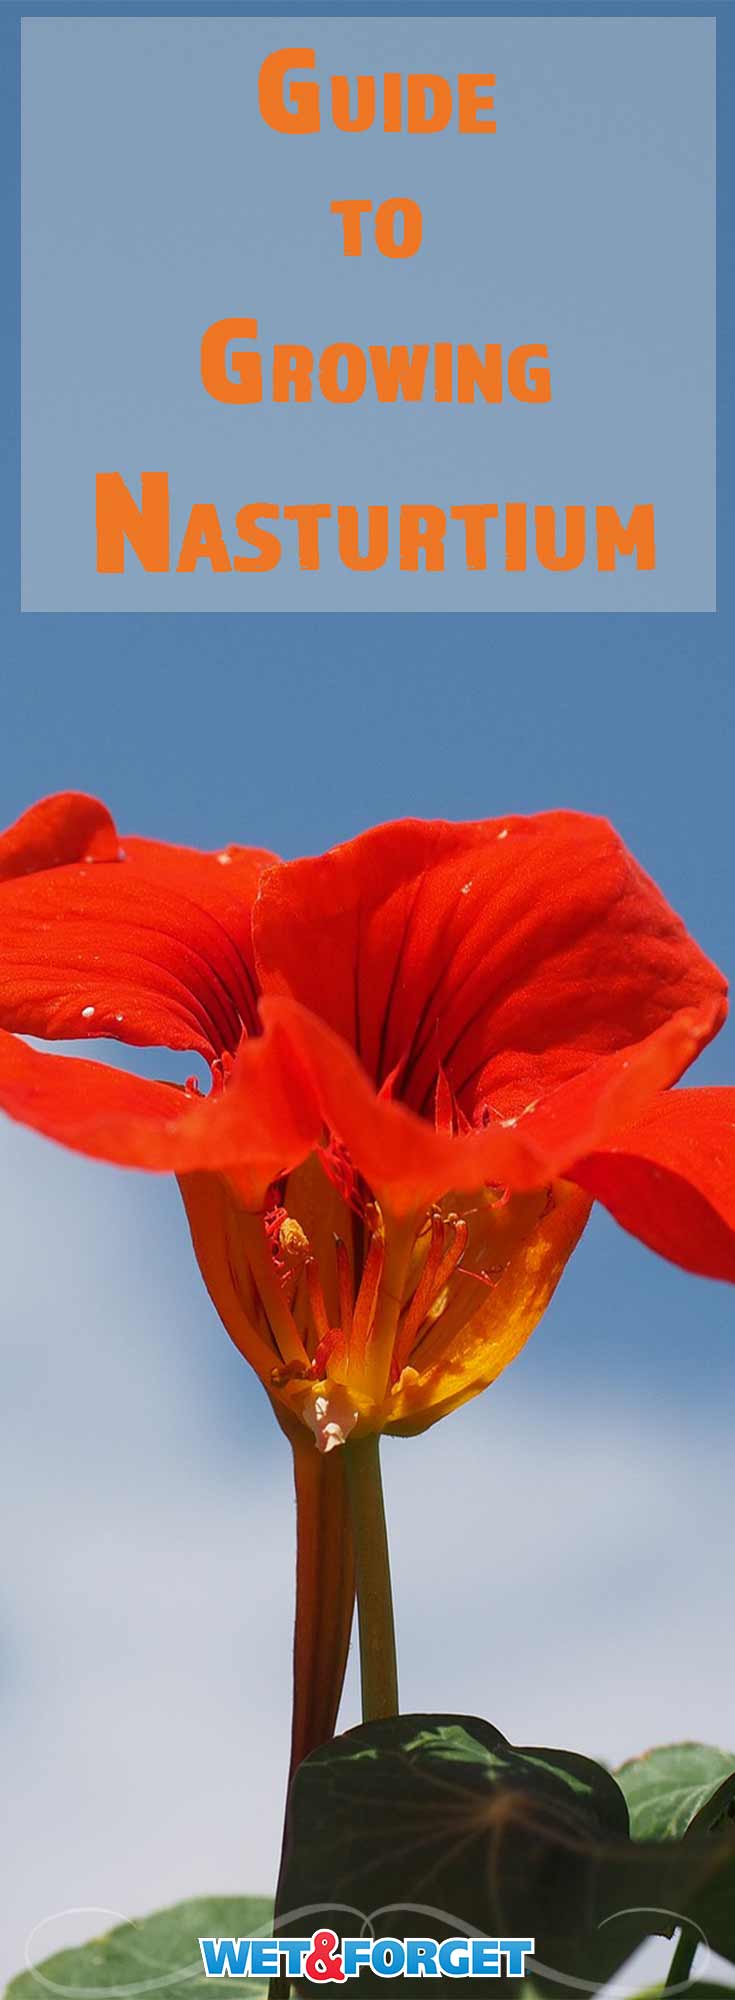 If you aren’t familiar with nasturtium, then you’ll be thrilled to get to know this hardy, versatile beauty. Nasturtium rewards even novice gardeners and poor soil with vibrantly-colored, fragrant blooms. And nasturtium has a few “hidden talents,” as well! Read more to learn about one of our favorite flowers.